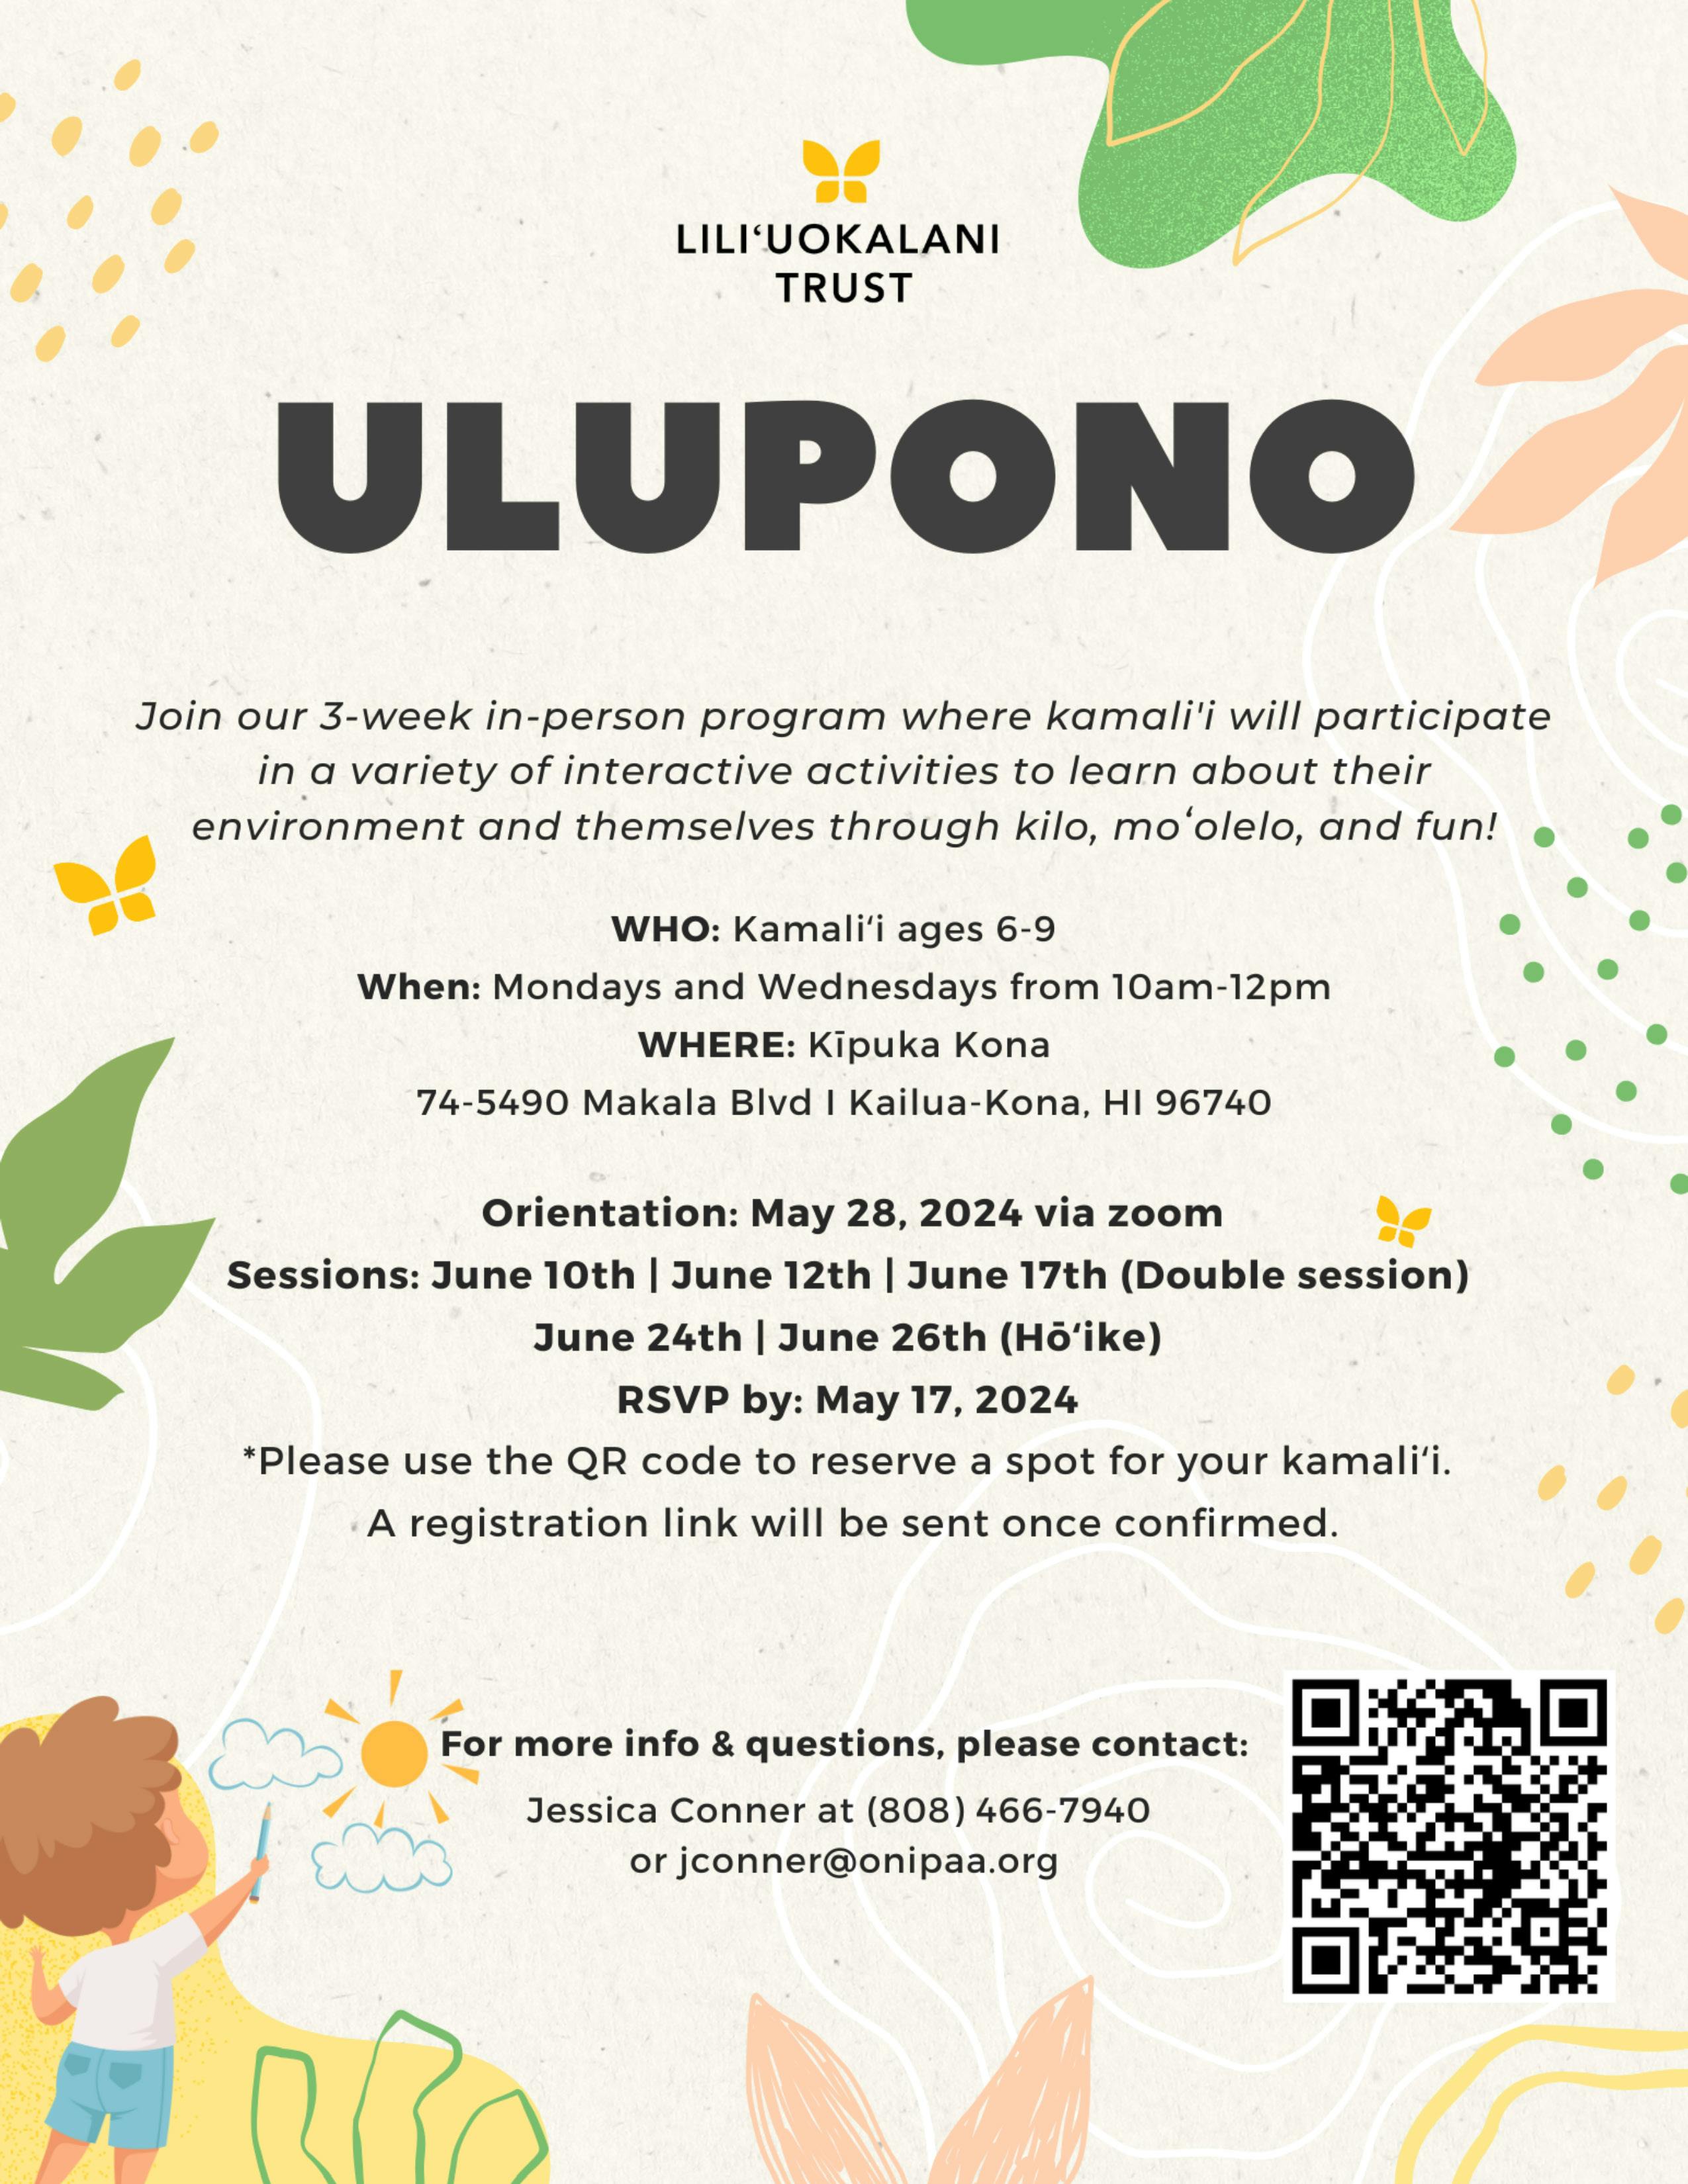 Flyer for Ulupono summer 2024. To apply, please contact jconner@onipaa.org.